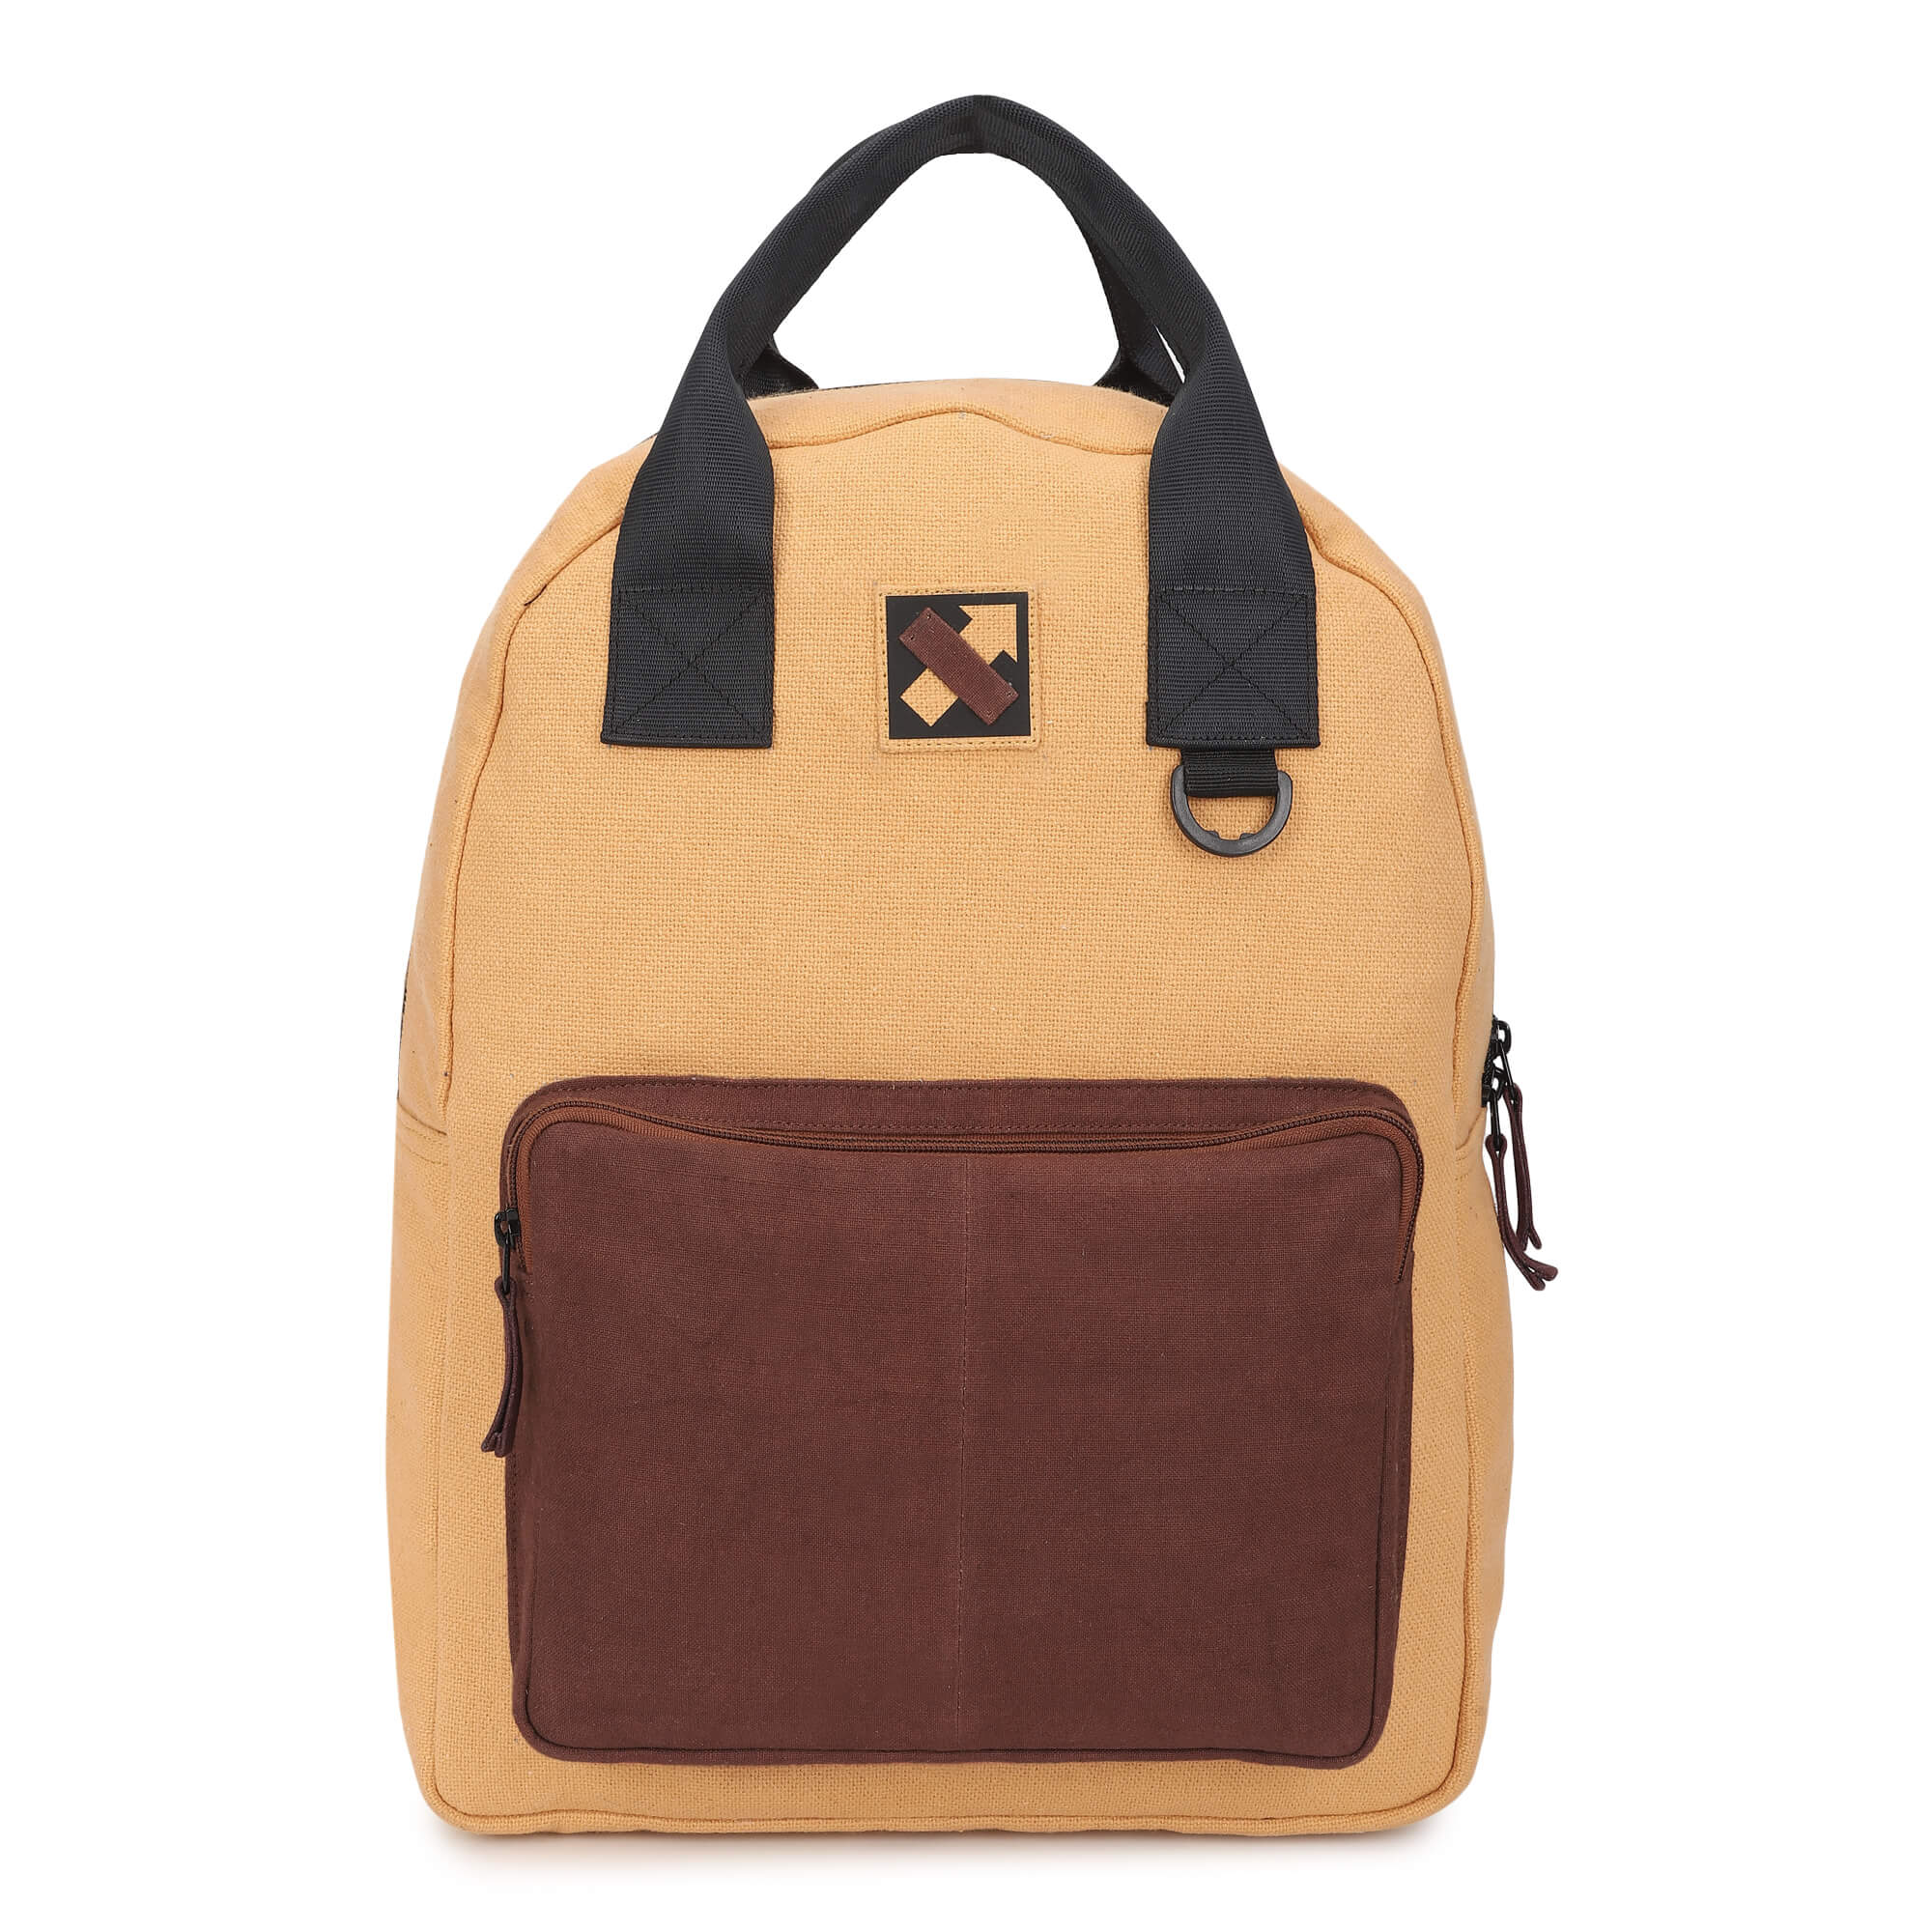 GRAB-AND-GO 210.3 LAPTOP BACKPACK